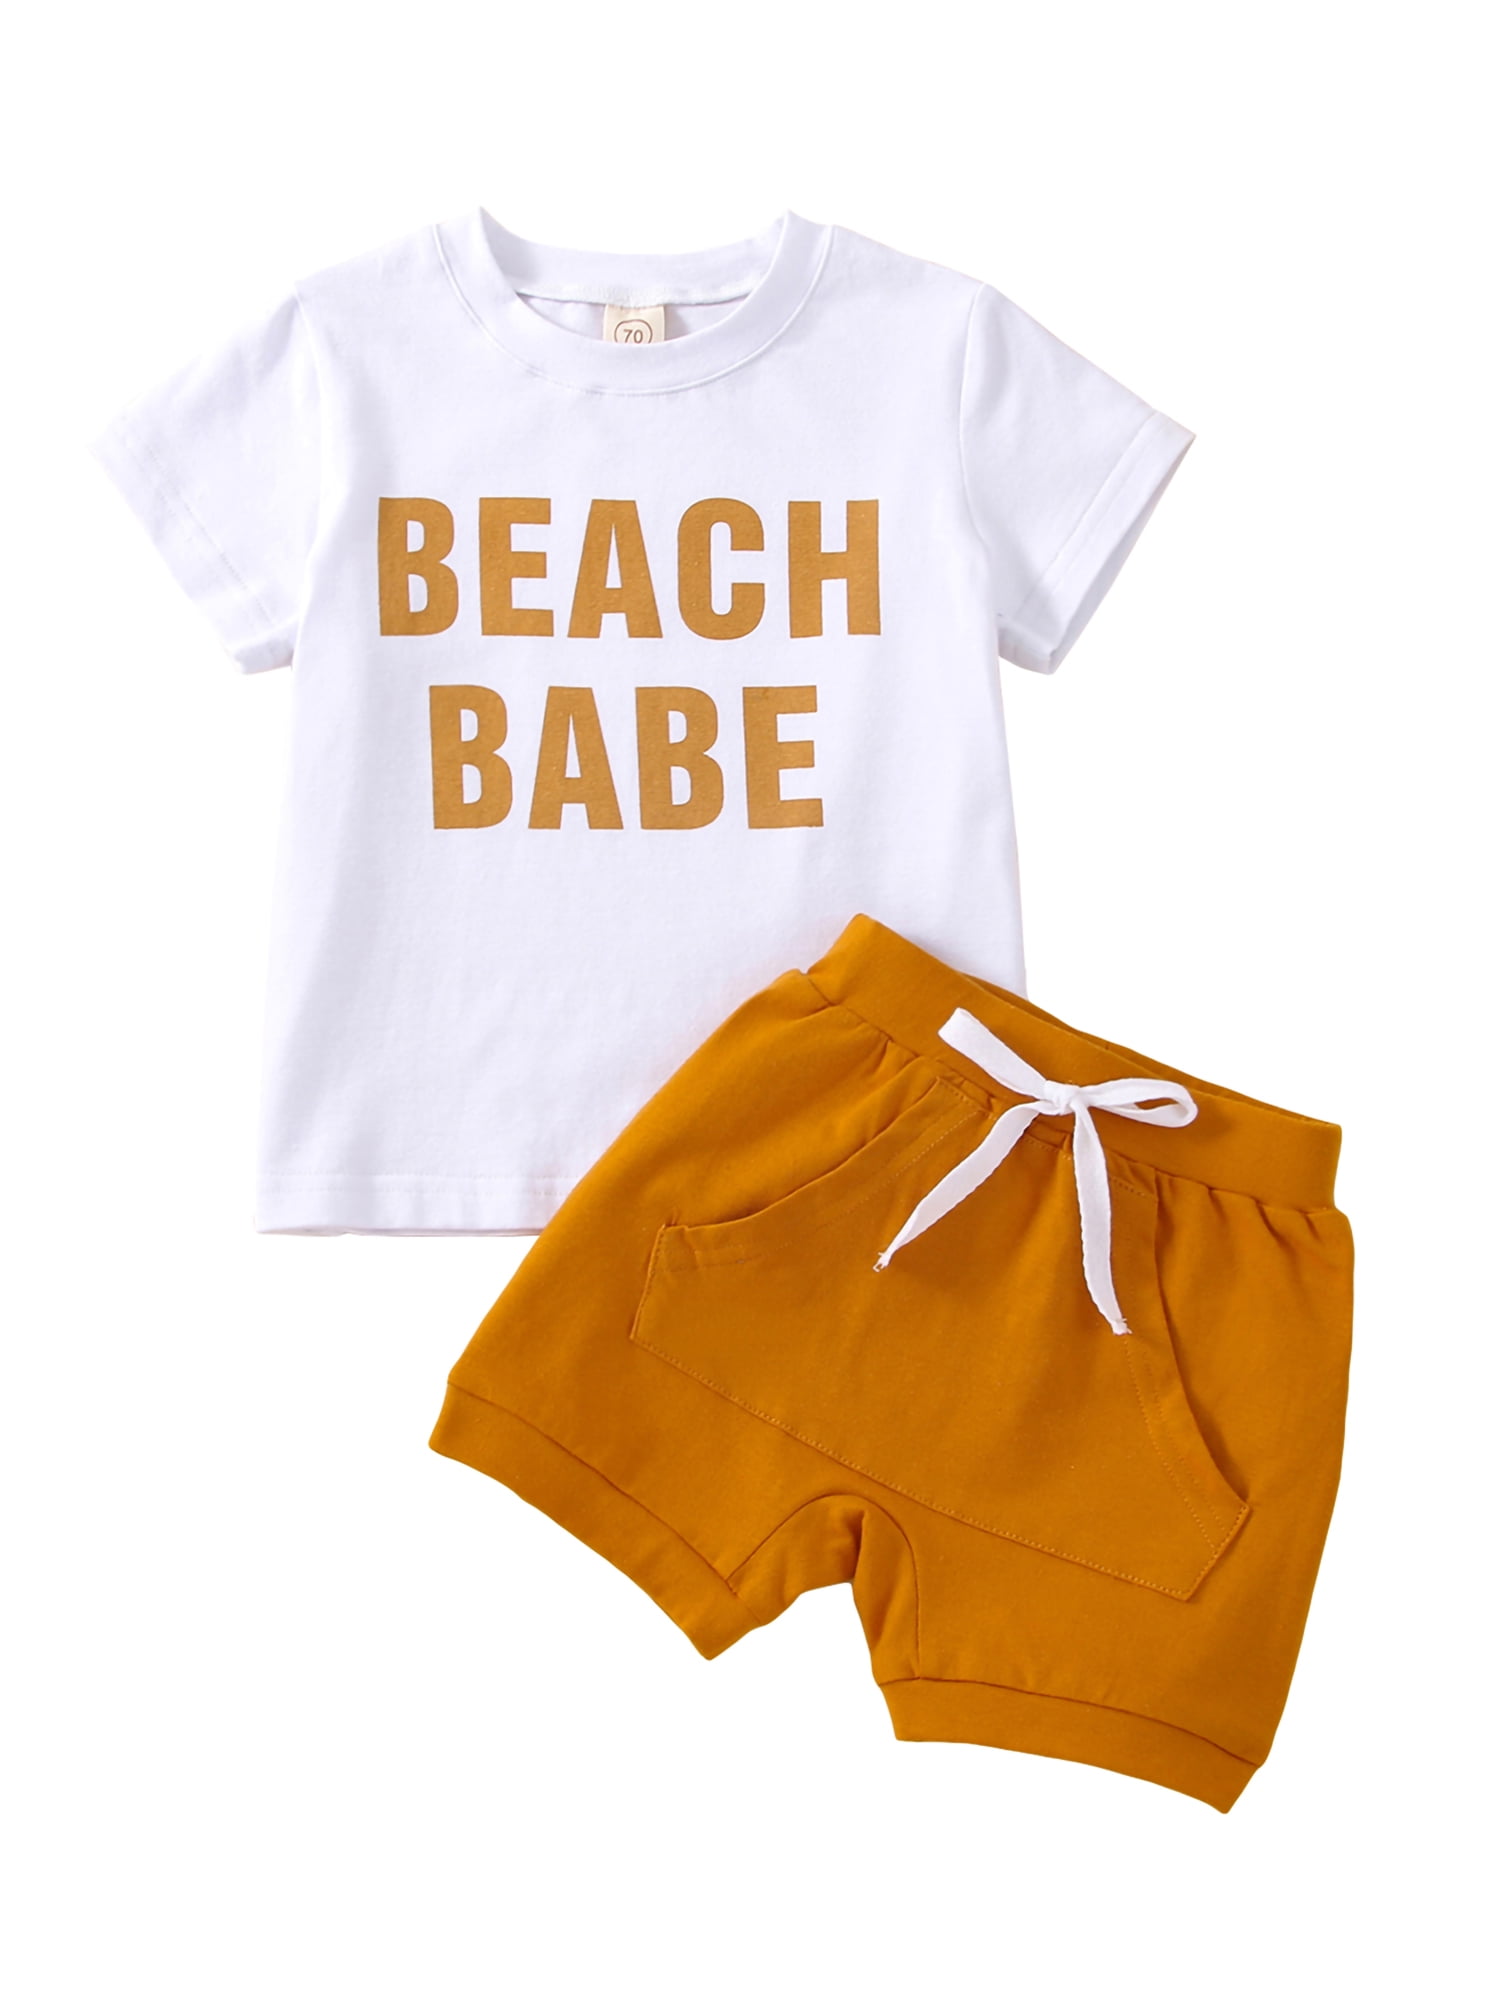 Toddler Girl Clothes 6Months-4T Cute Baby Summer Outfits Sets Sleeve Tshirt Pocket Top Cotton Shorts 2PCS 